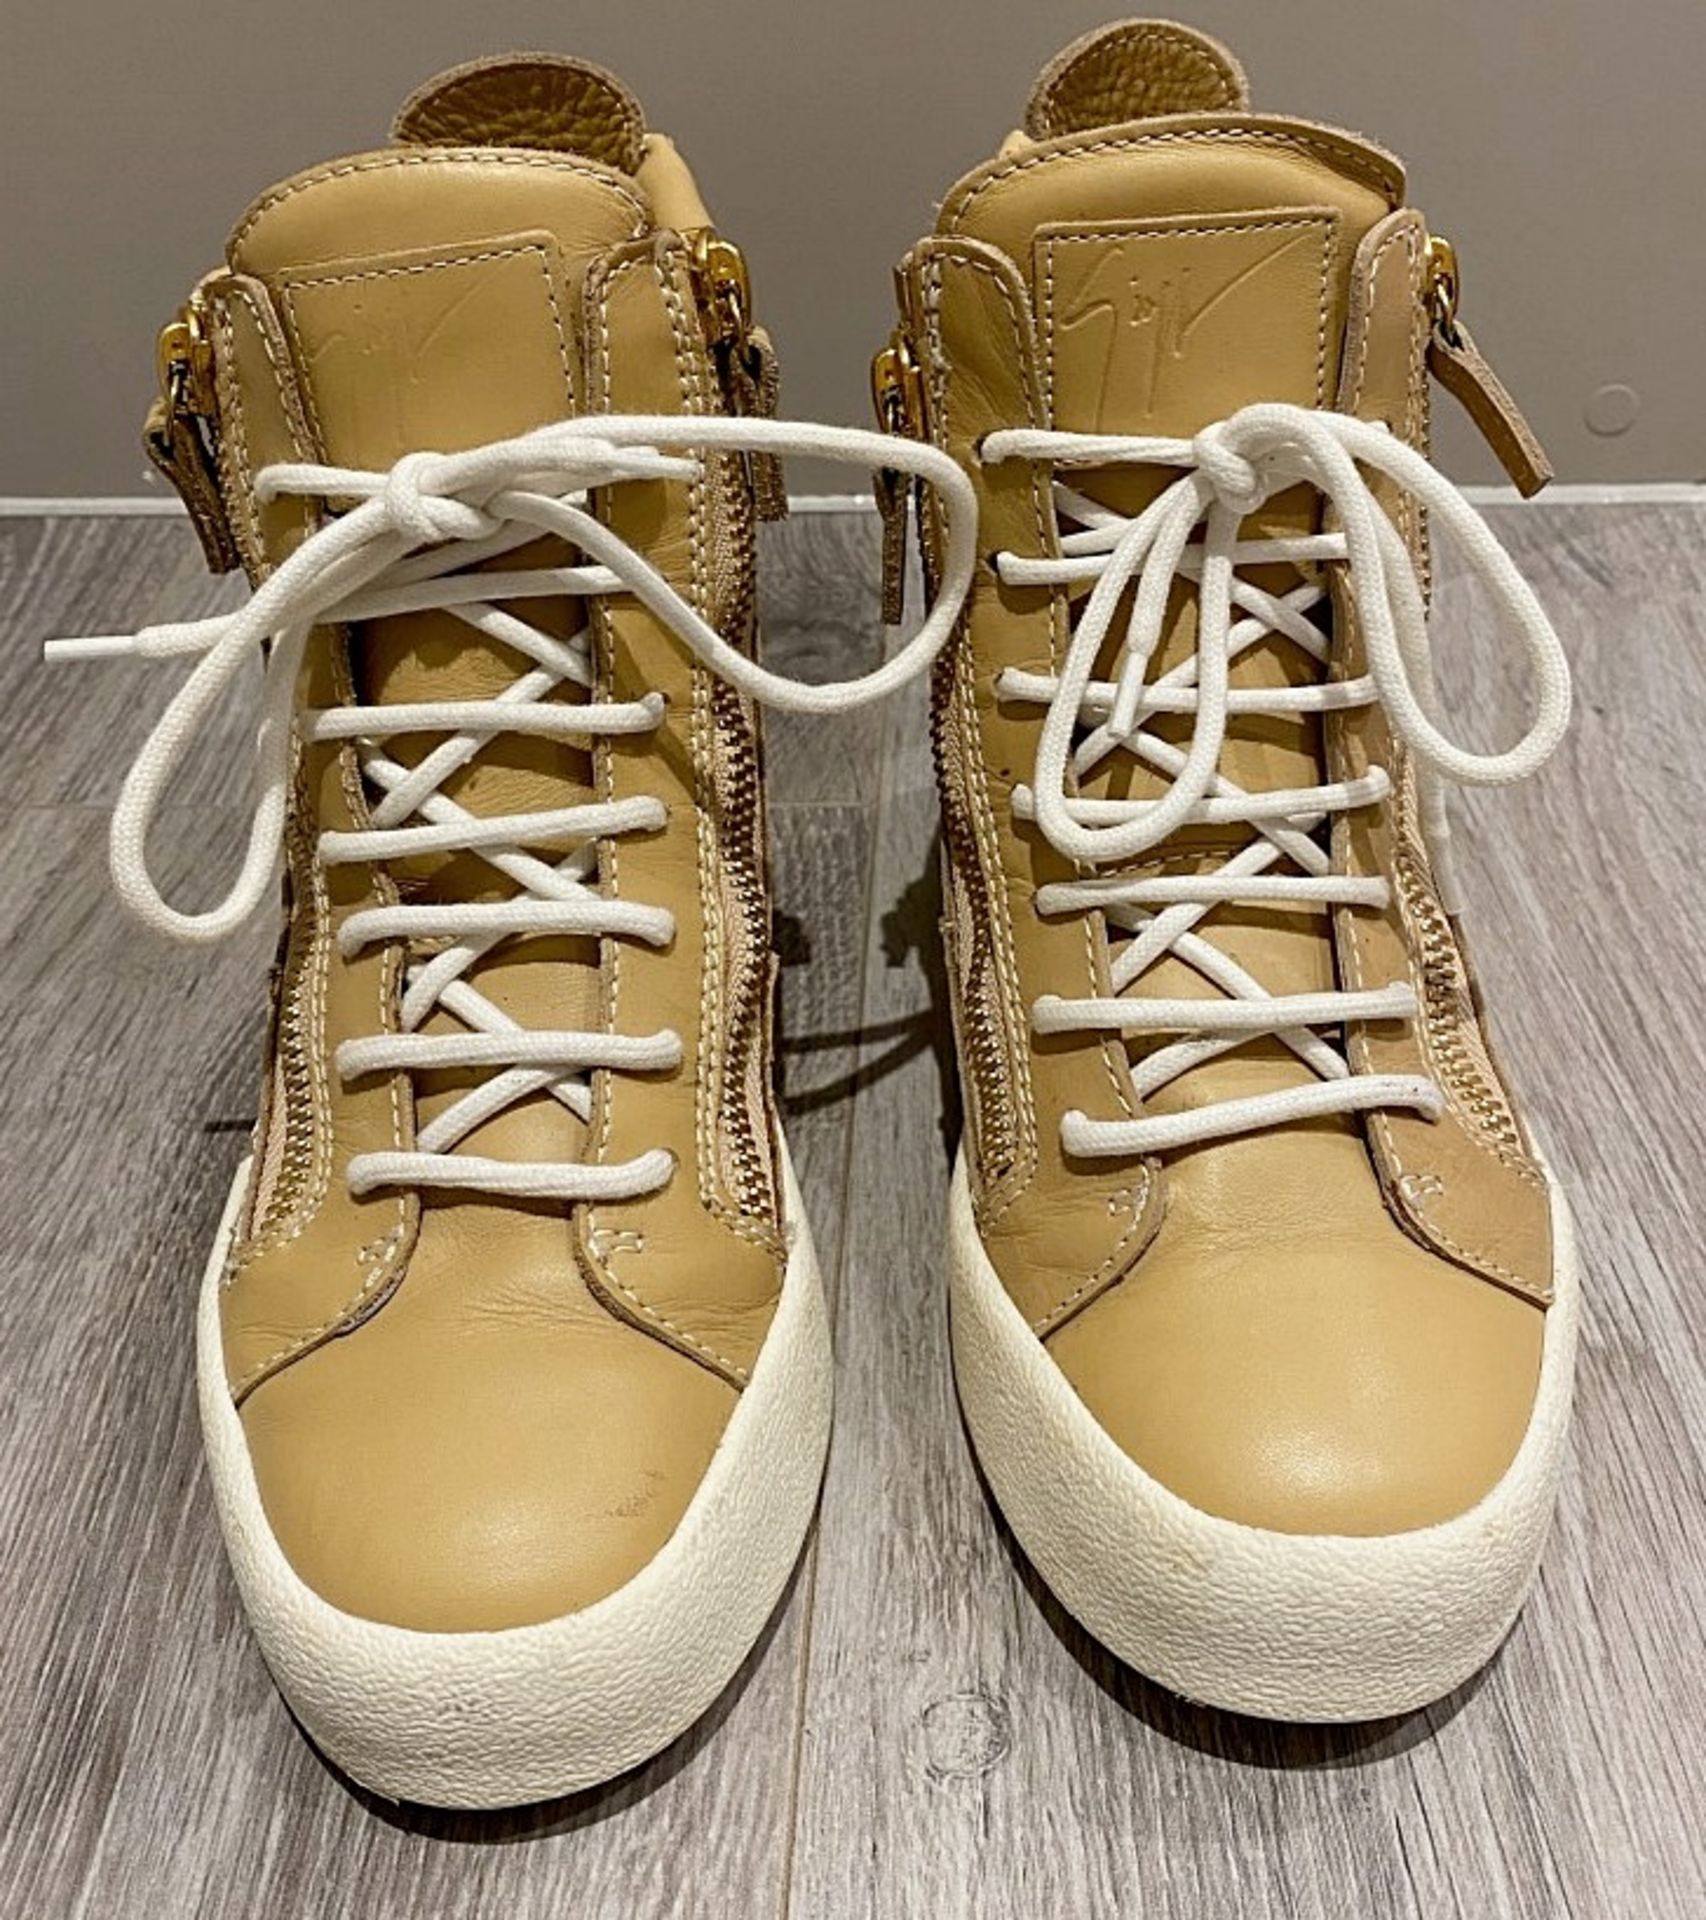 1 x Pair Of Genuine Guiseppe Zanotti Sneakers In Tan - Size: 36 - Preowned in Good Condition - Ref: